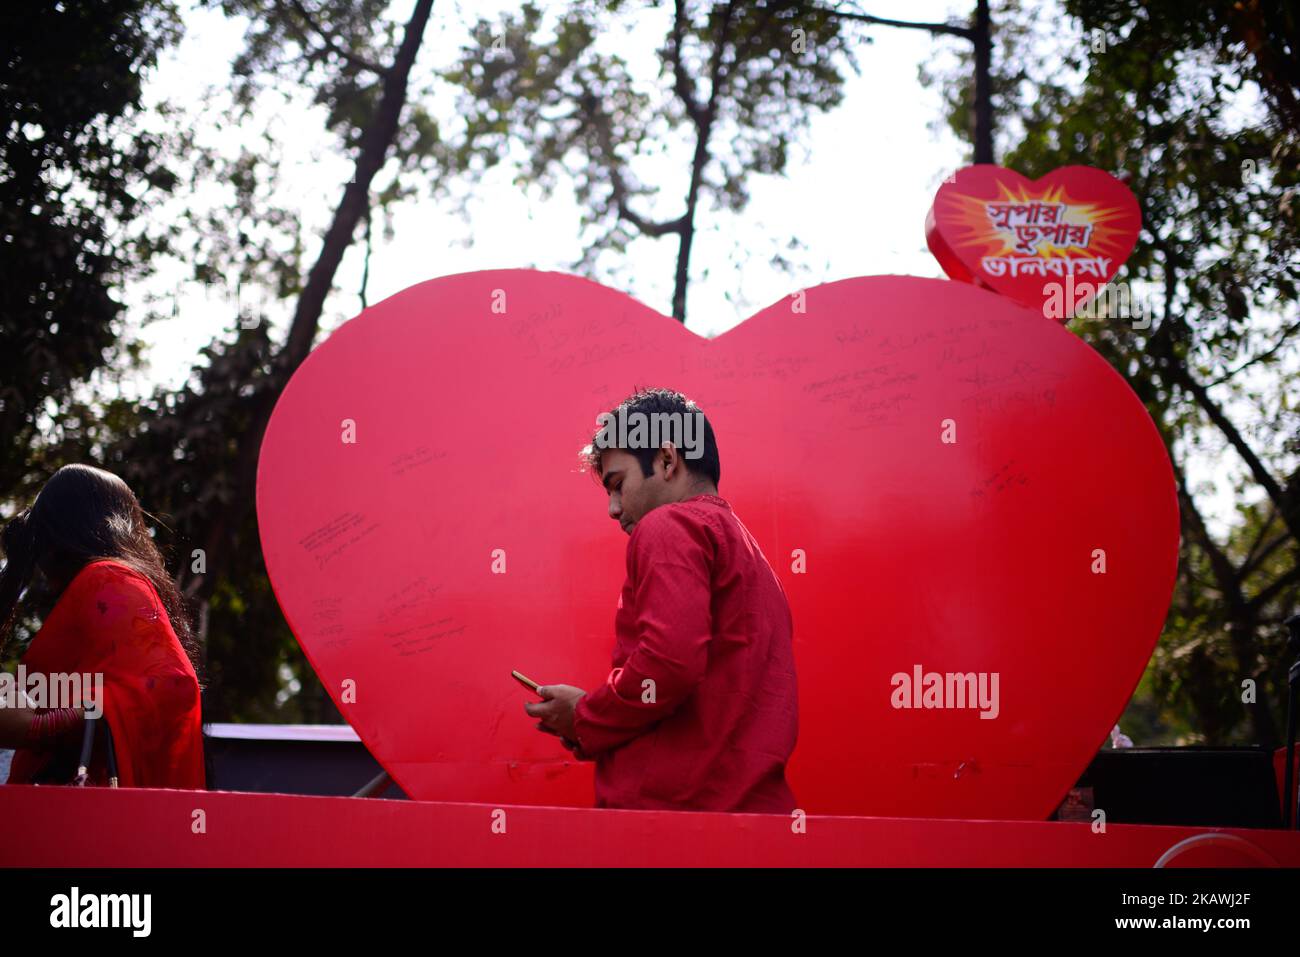 Bangladeshi couple in a park to celebrate valentine’s day in Dhaka on February 14, 2018. Valentine's Day, also called Saint Valentine's Day or the Feast of Saint Valentine, is celebrated annually on February 14. Originating as a Western Christian feast day honoring one or two early saints named Valentinus, Valentine's Day is recognized as a significant cultural, religious, and commercial celebration of romance and romantic love in many regions around the world, although it is not a public holiday in any country. (Photo by Mehedi Hasan/NurPhoto) Stock Photo